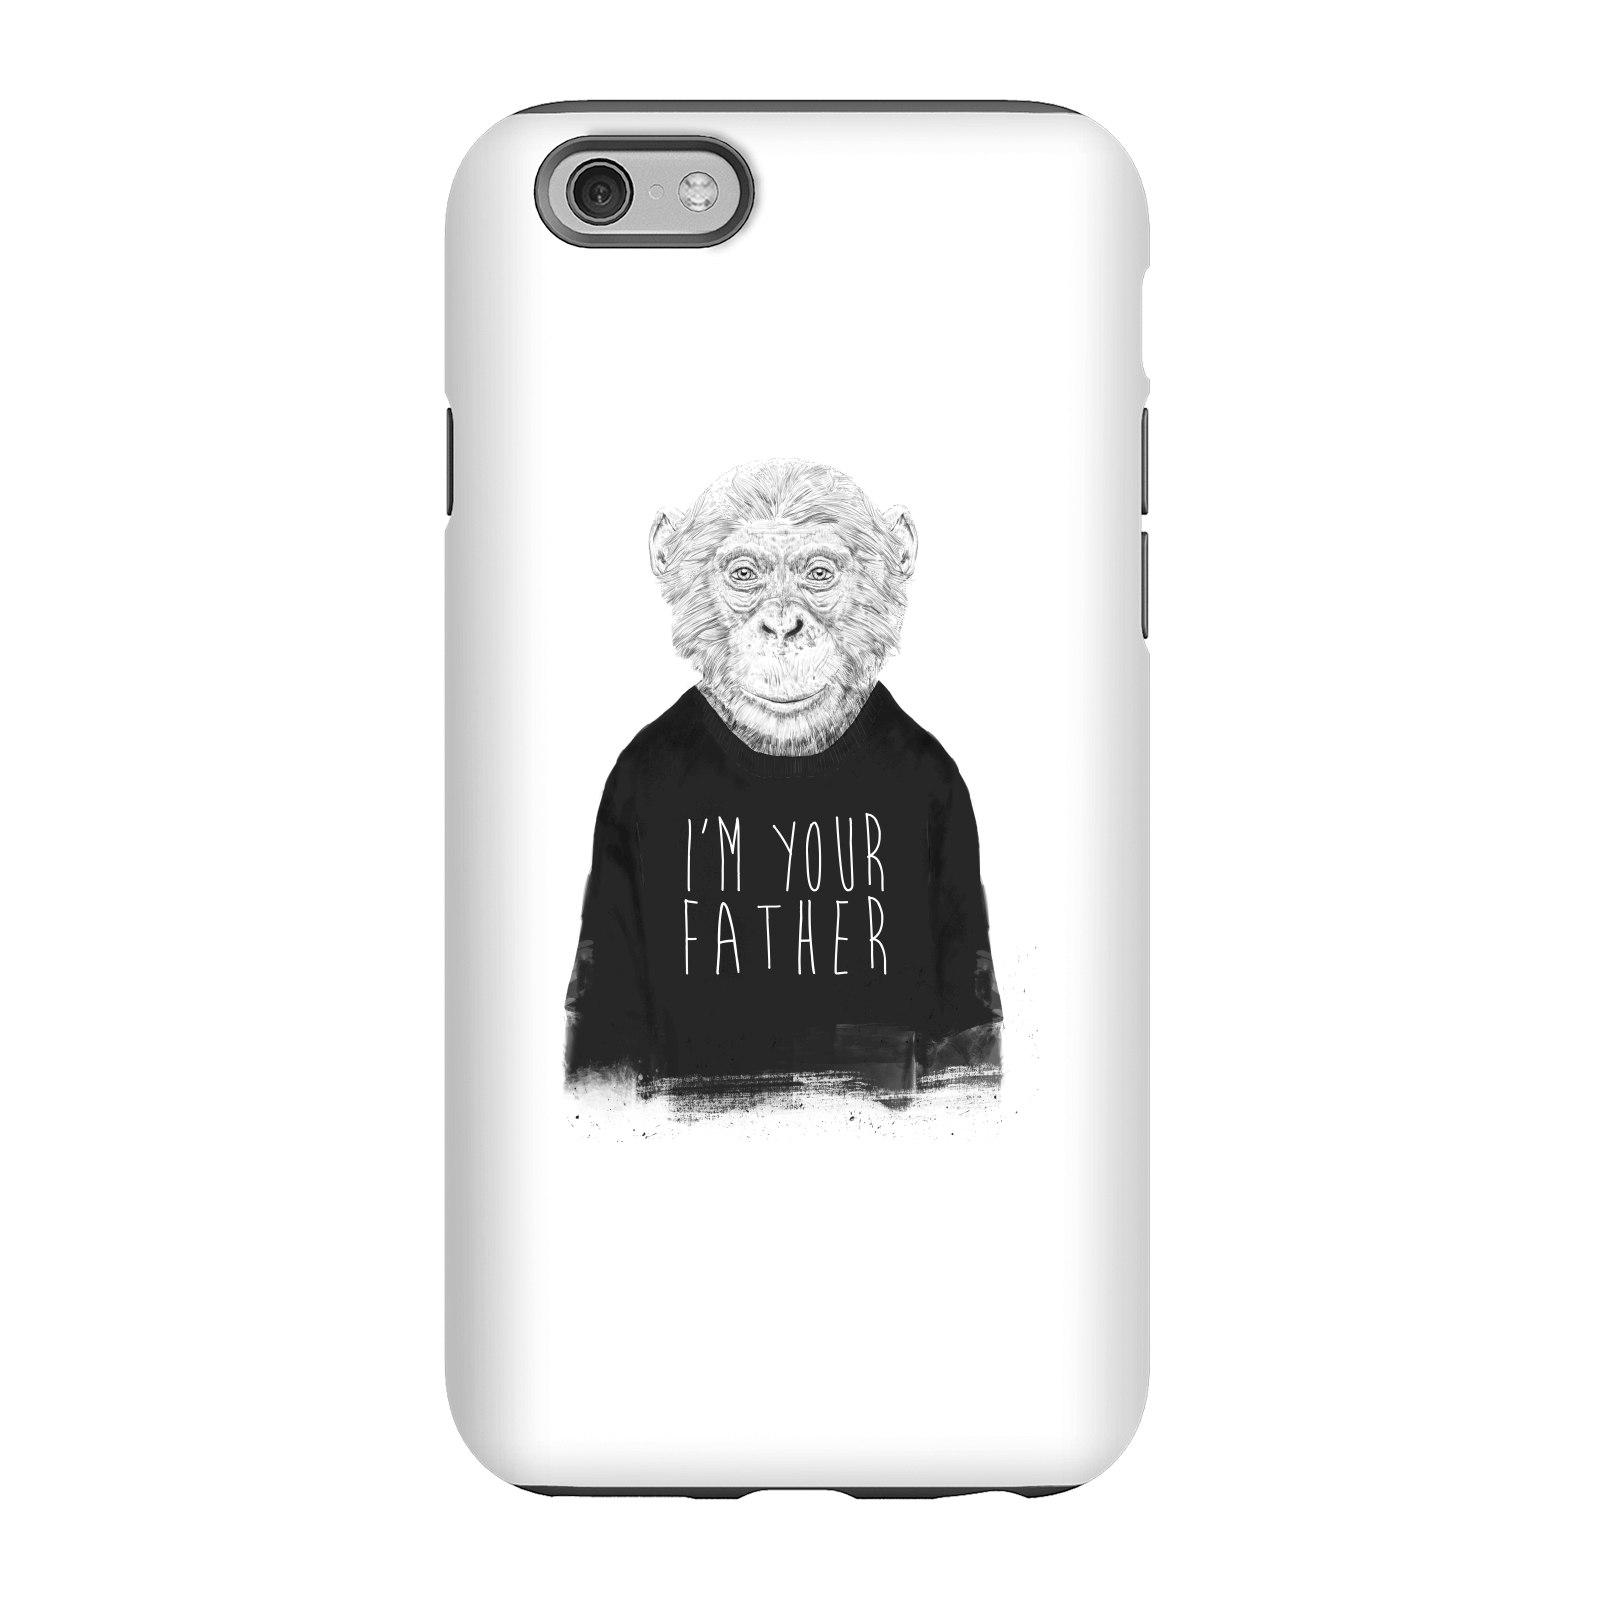 Balazs Solti I'm Your Father Phone Case for iPhone and Android - iPhone 6 - Tough Case - Gloss